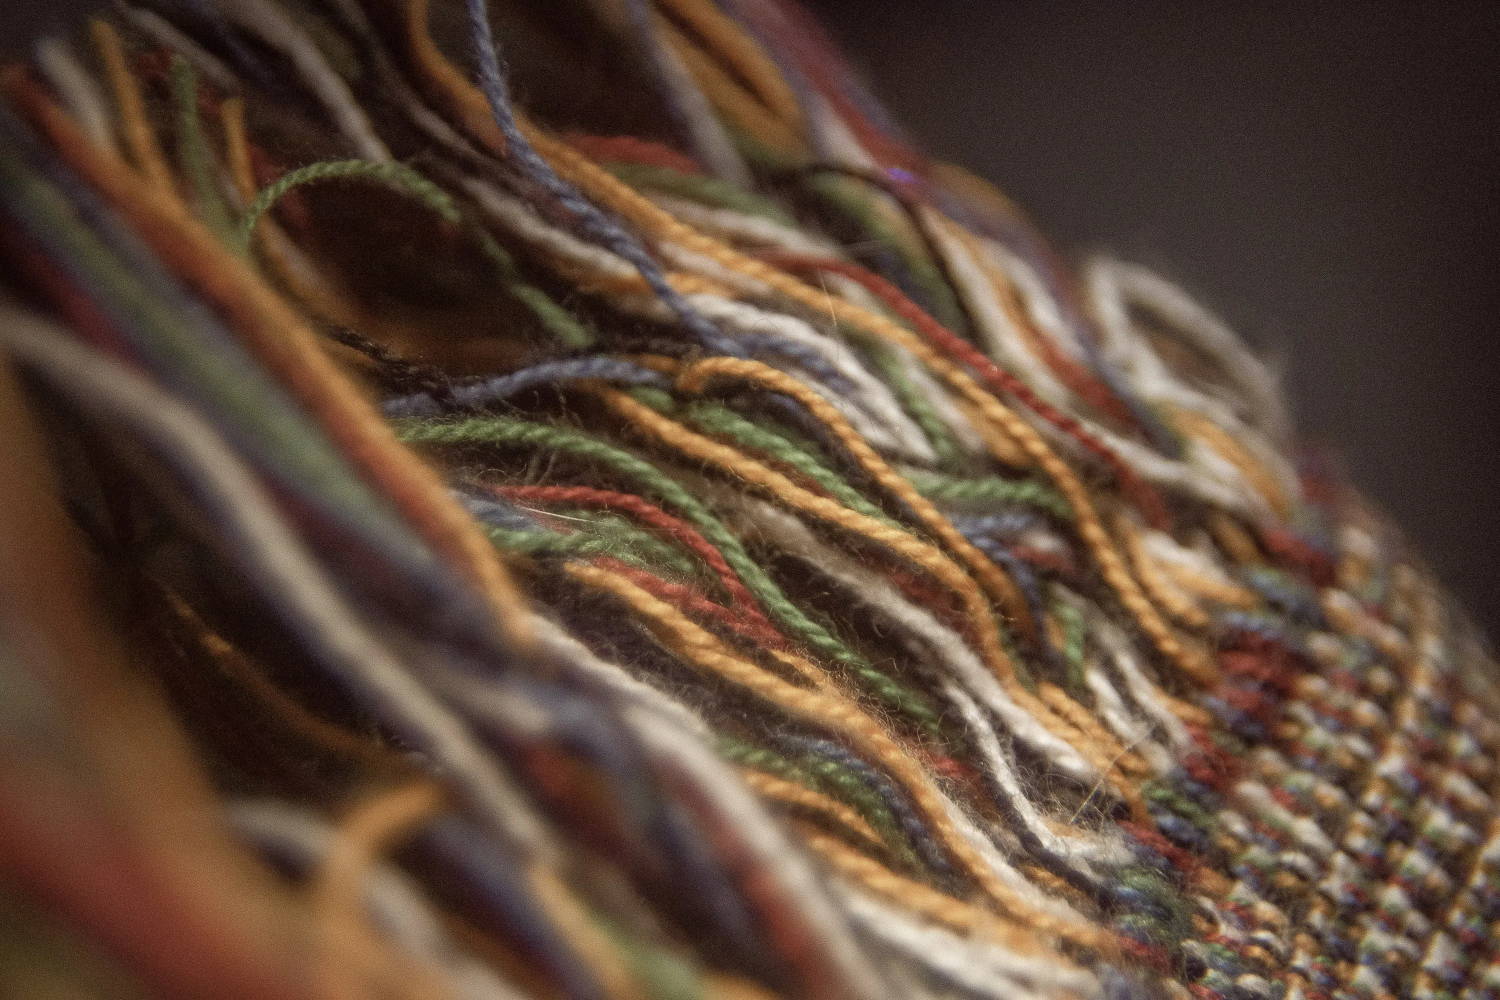 Macro shot of some threads at the edge of a blanket.